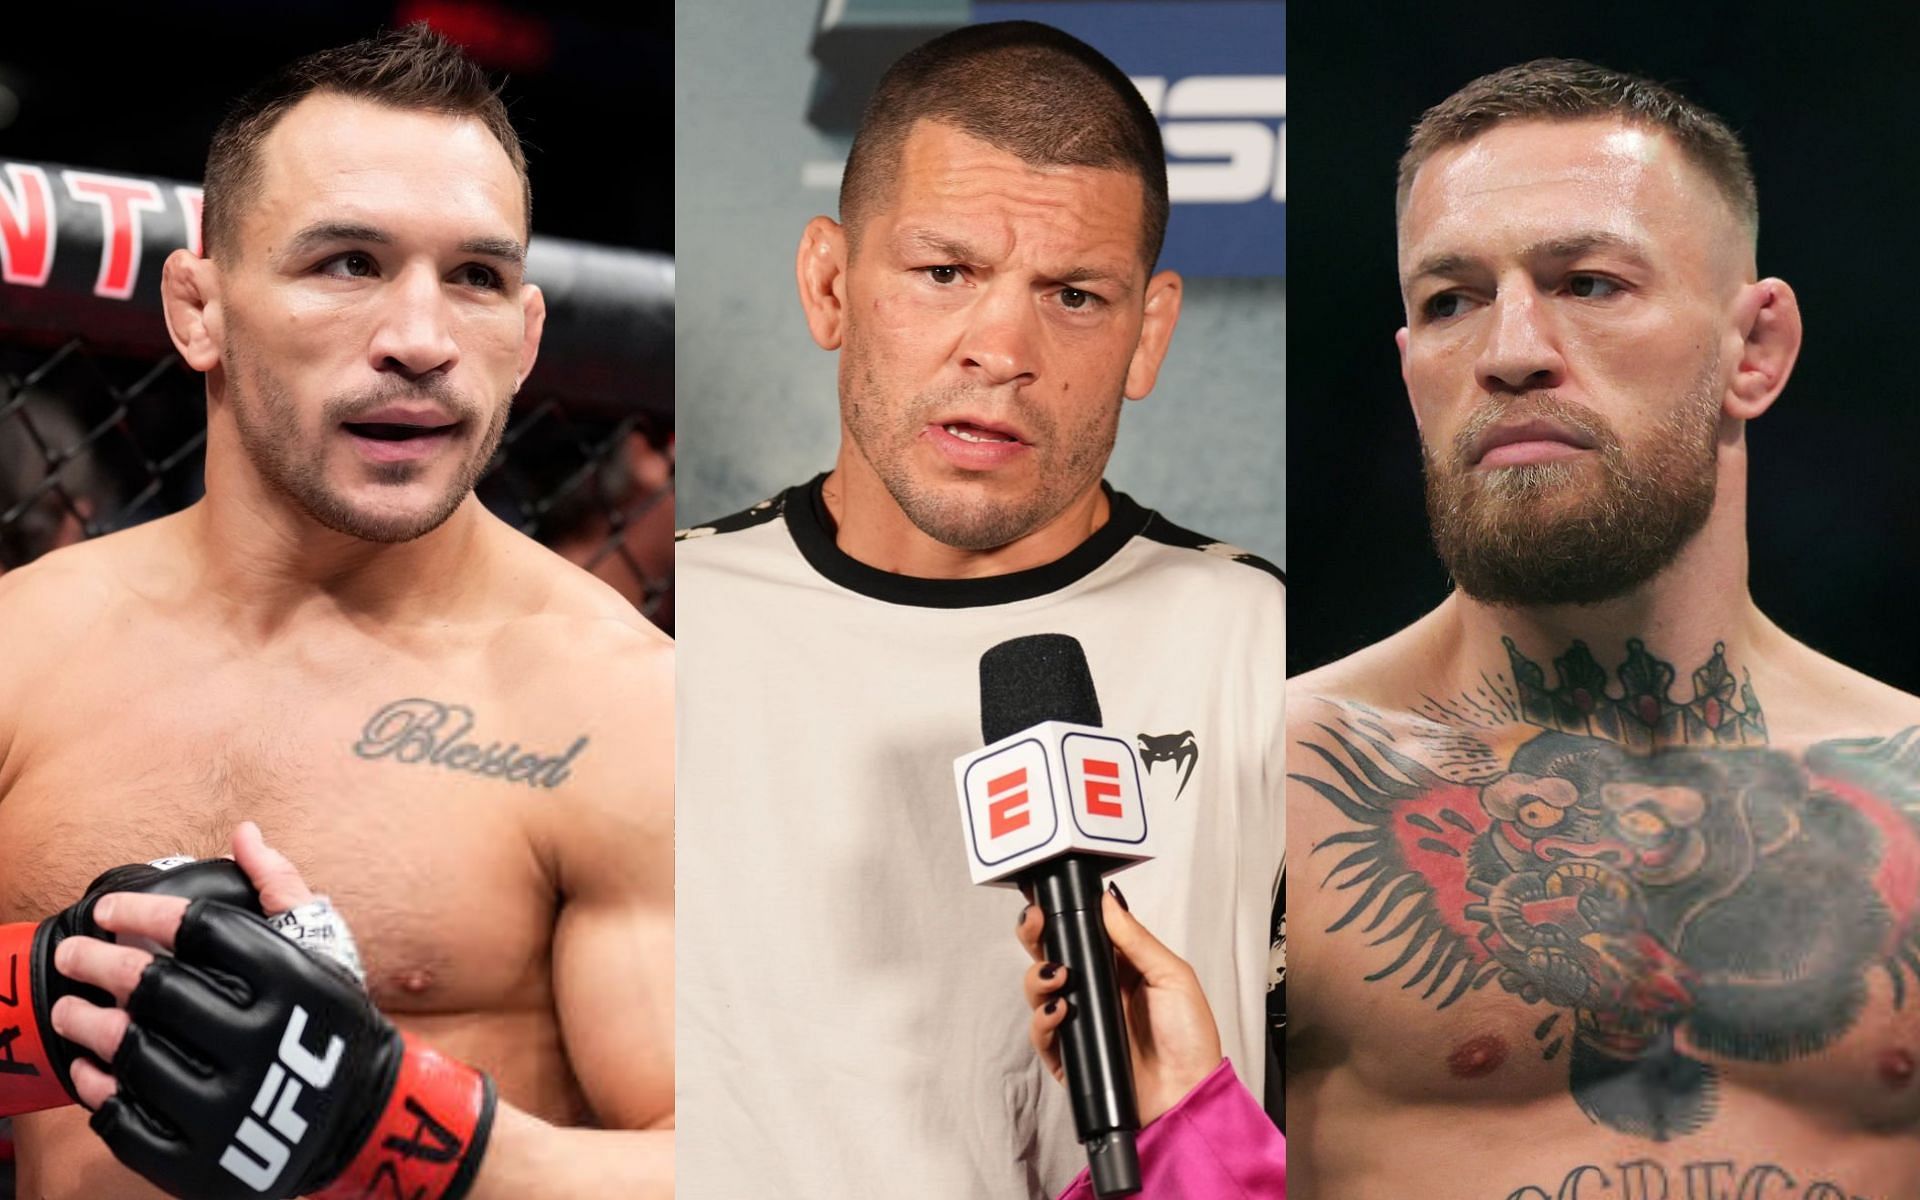 Michael Chandler (left), Nate Diaz (middle) and Conor McGregor (right) [Images Courtesy: @GettyImages]